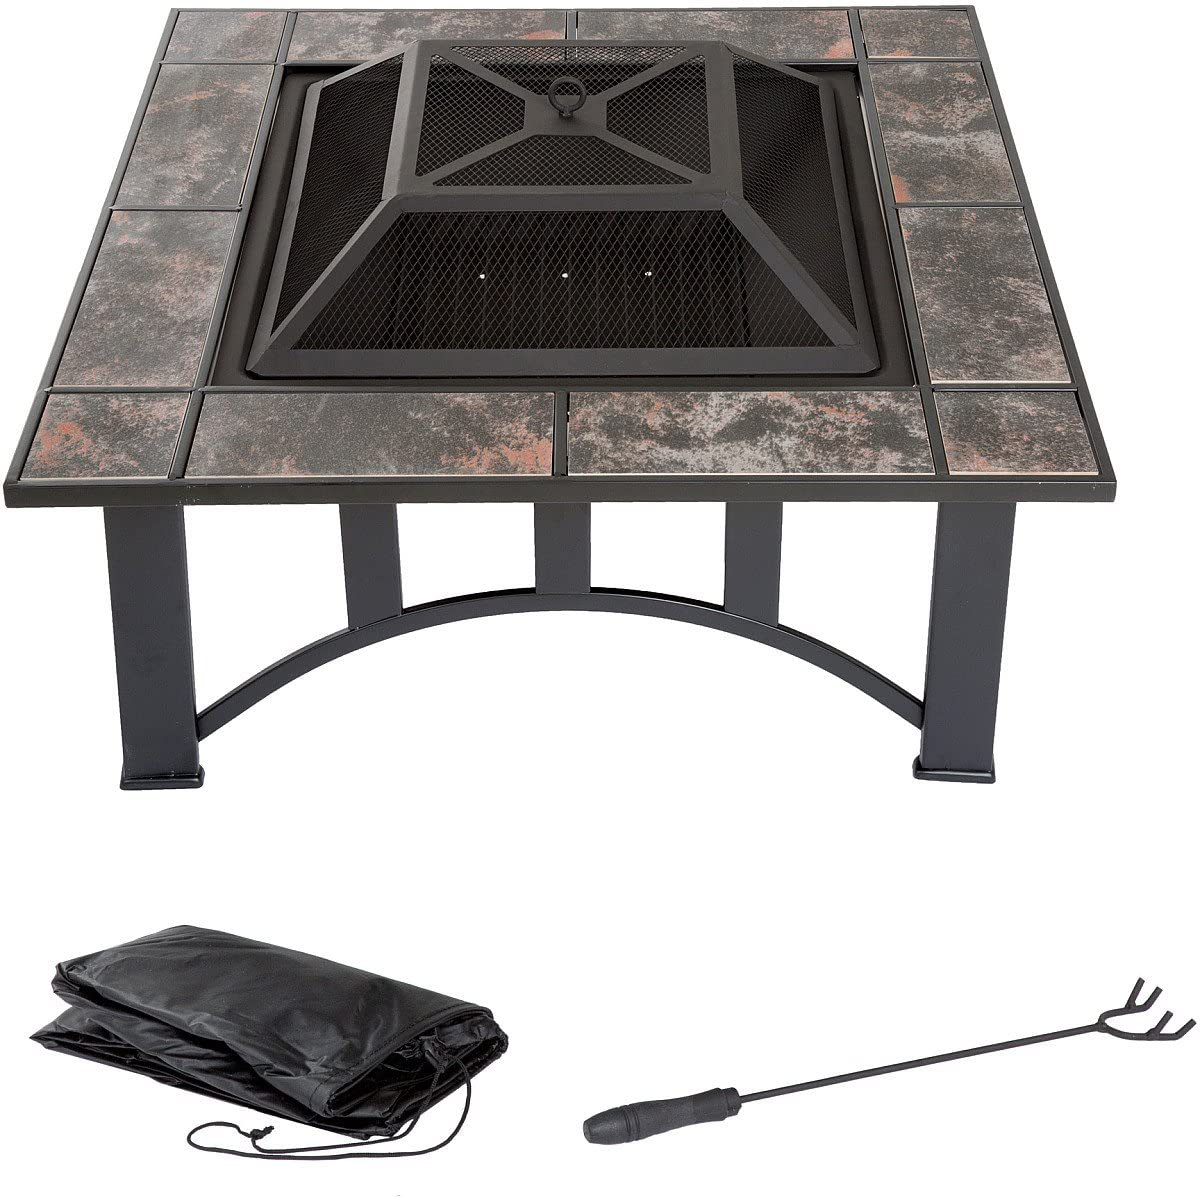 Fire Pit Set, Wood Burning Pit - Includes Screen, Cover and Log Poker - Great for Outdoor and Patio, 33 inch Square Marble Tile Firepit by Pure Garden